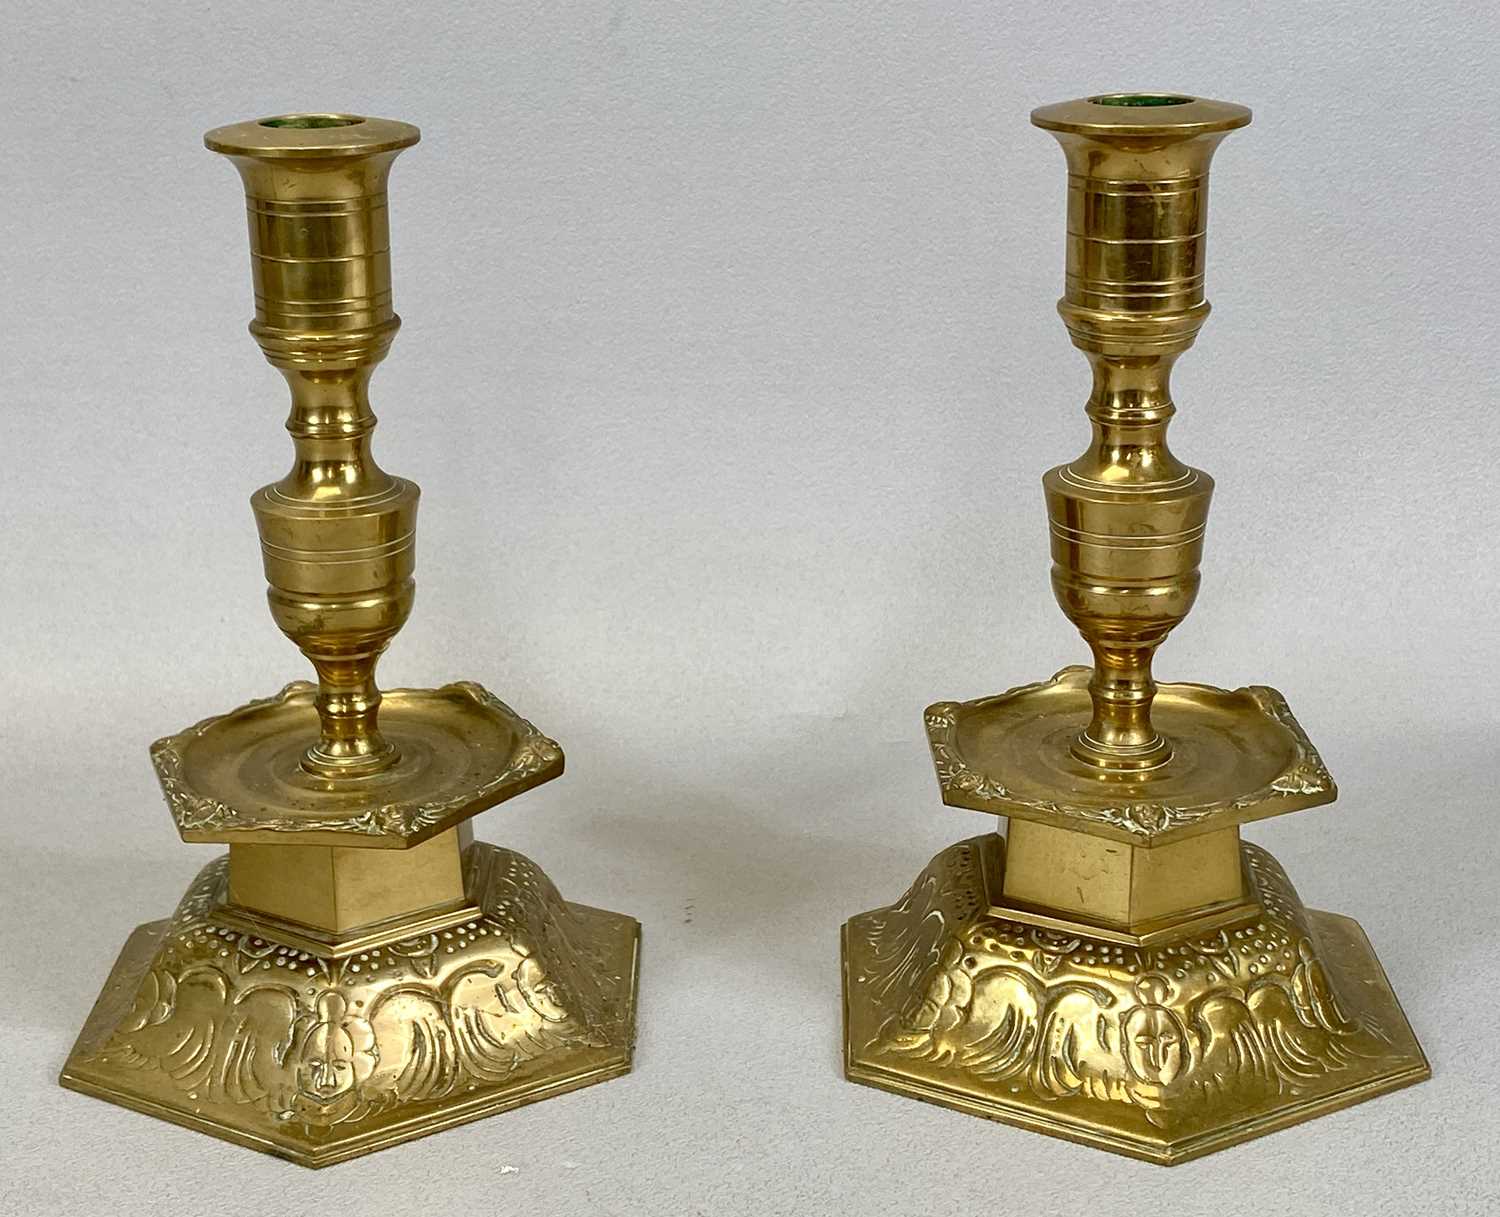 PAIR OF YSTAD METALL SWEDISH CAST BRASS CANDLESTICKS, with hexagonal mid column drip trays and domed